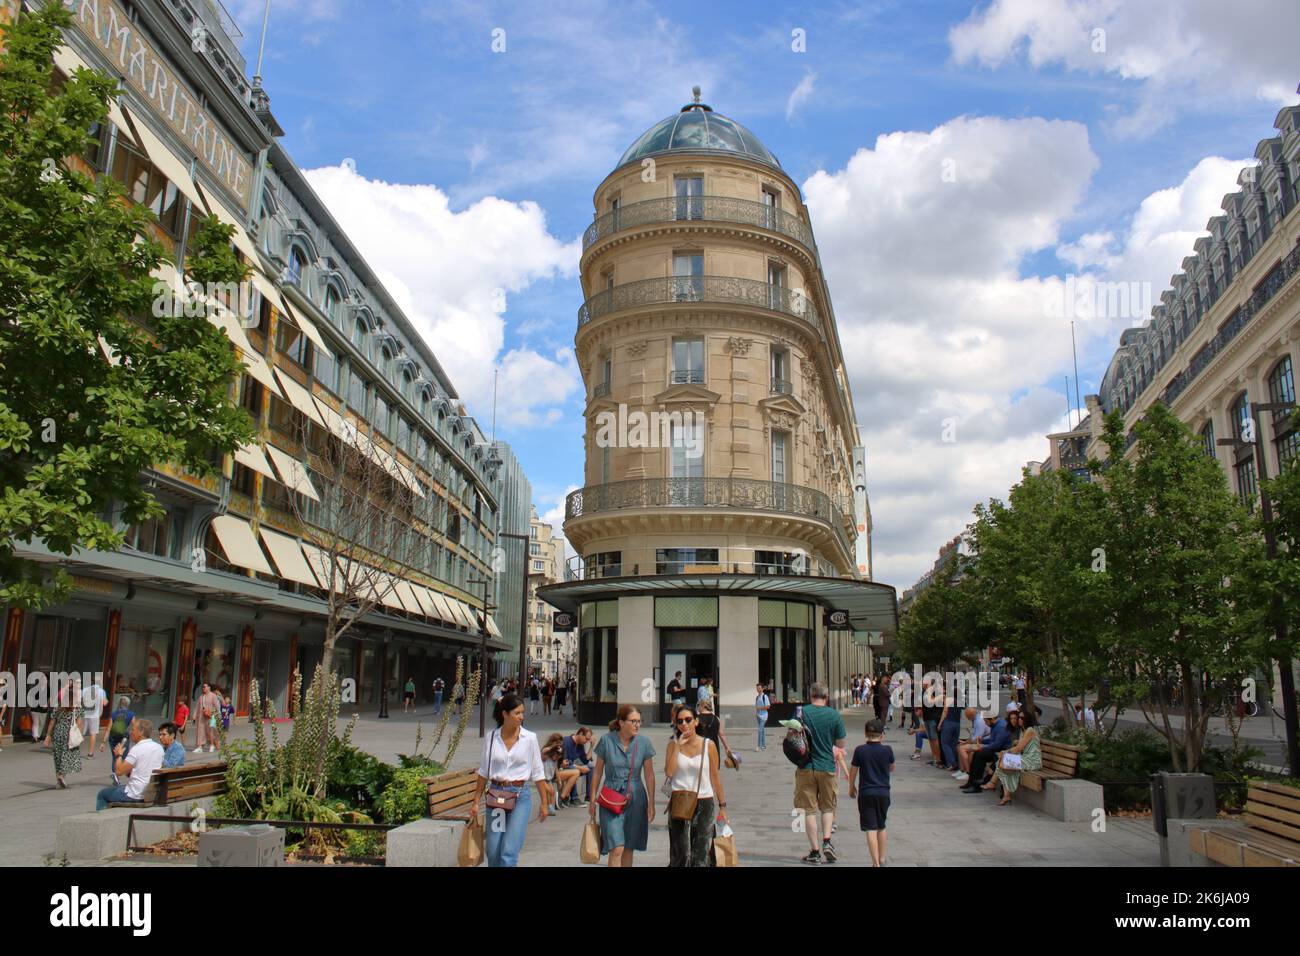 Beautiful view of ornate 19th century buildings and the La Samaritaine Department store along the Rue du Pont Neuf in the 1st arrondissement of Paris. Stock Photo